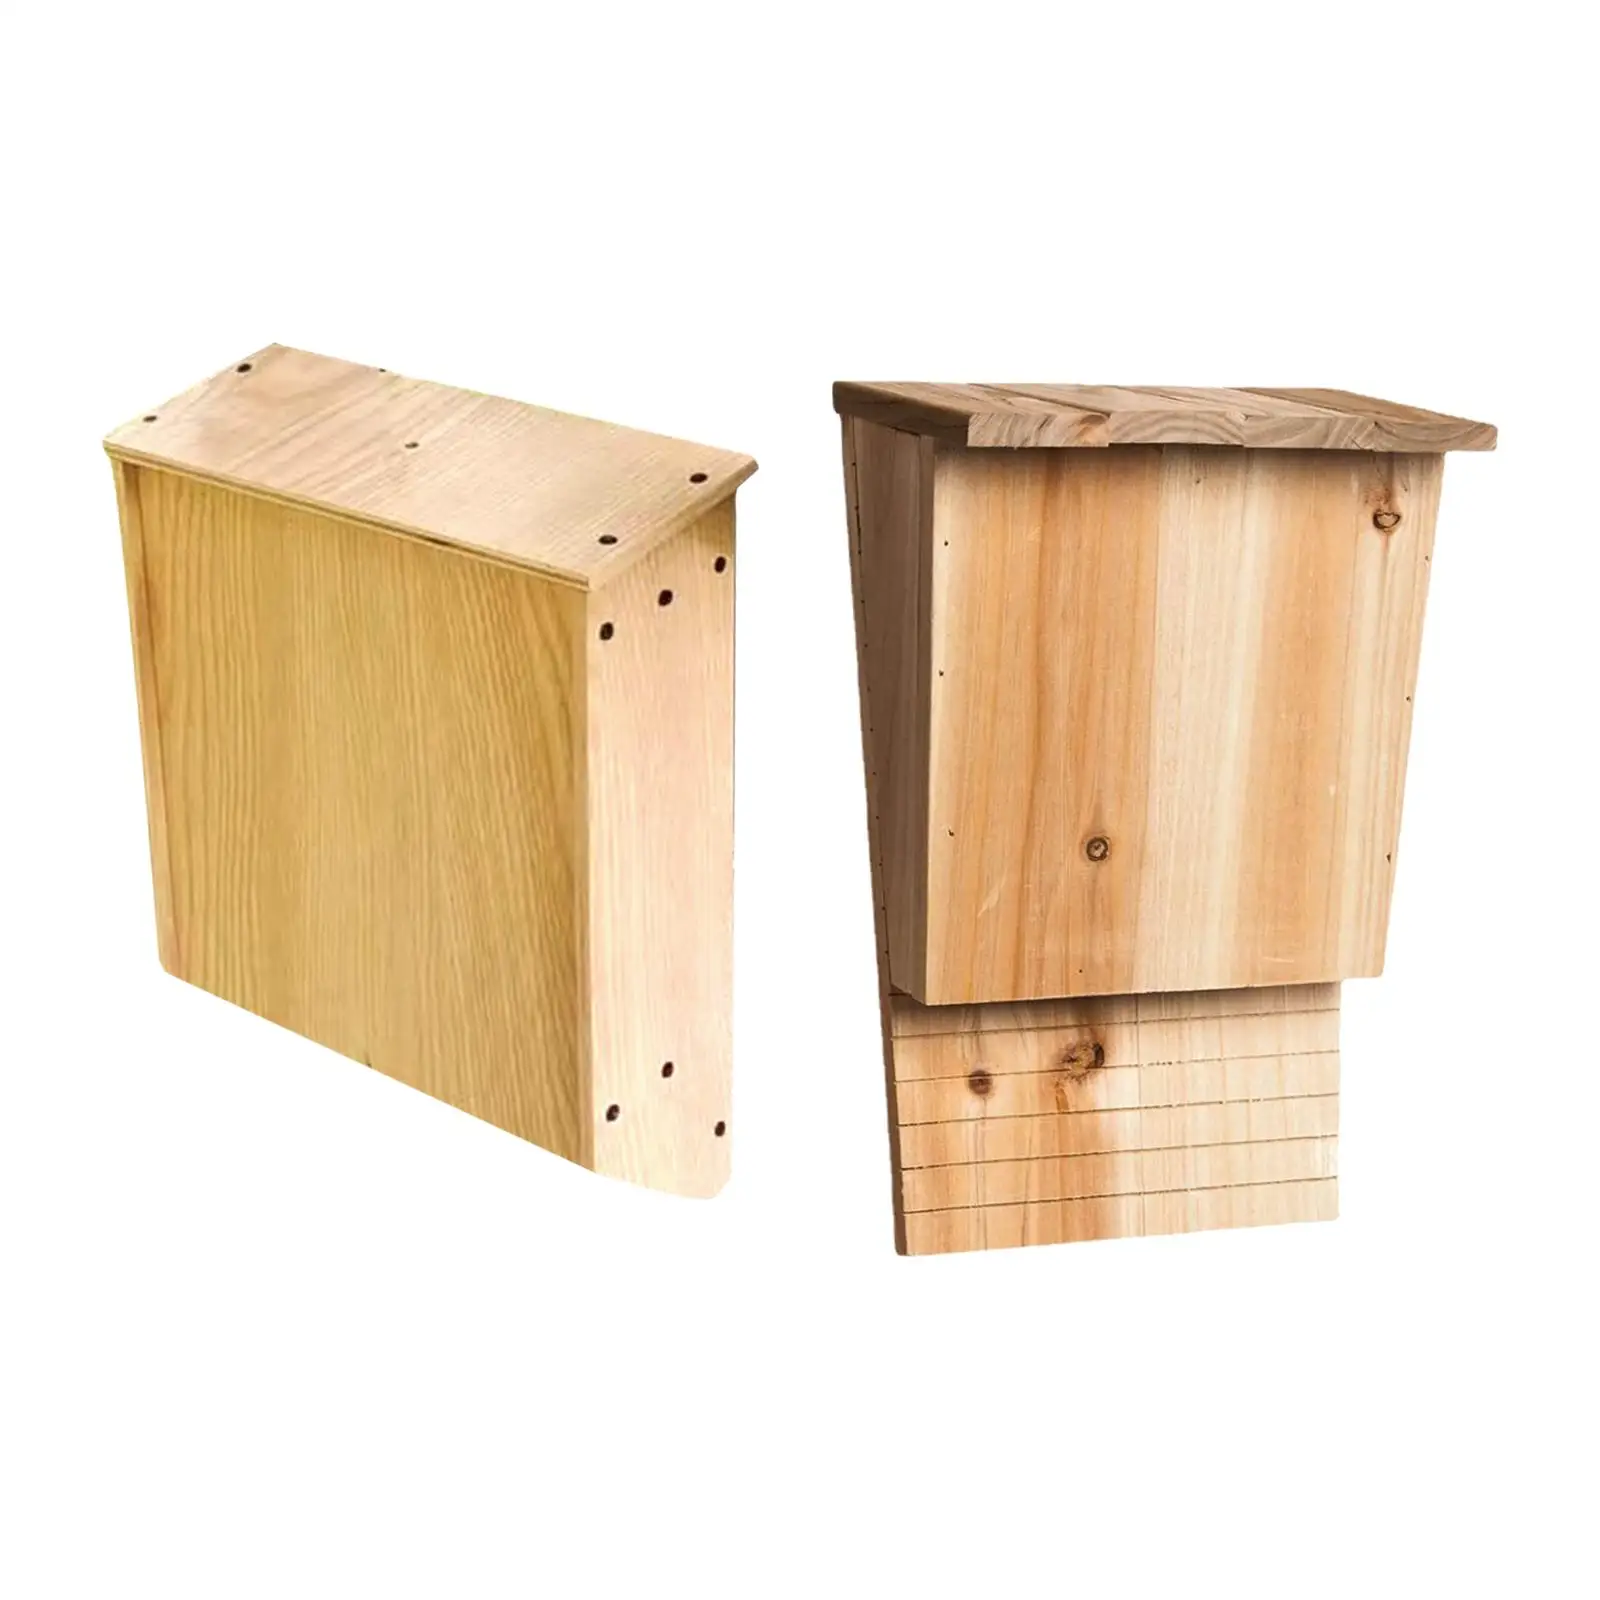 Bat House Big box Wooden Weather Resistant professional Easy to Land and Roost Outdoor Shelter Handcrafted Supplies